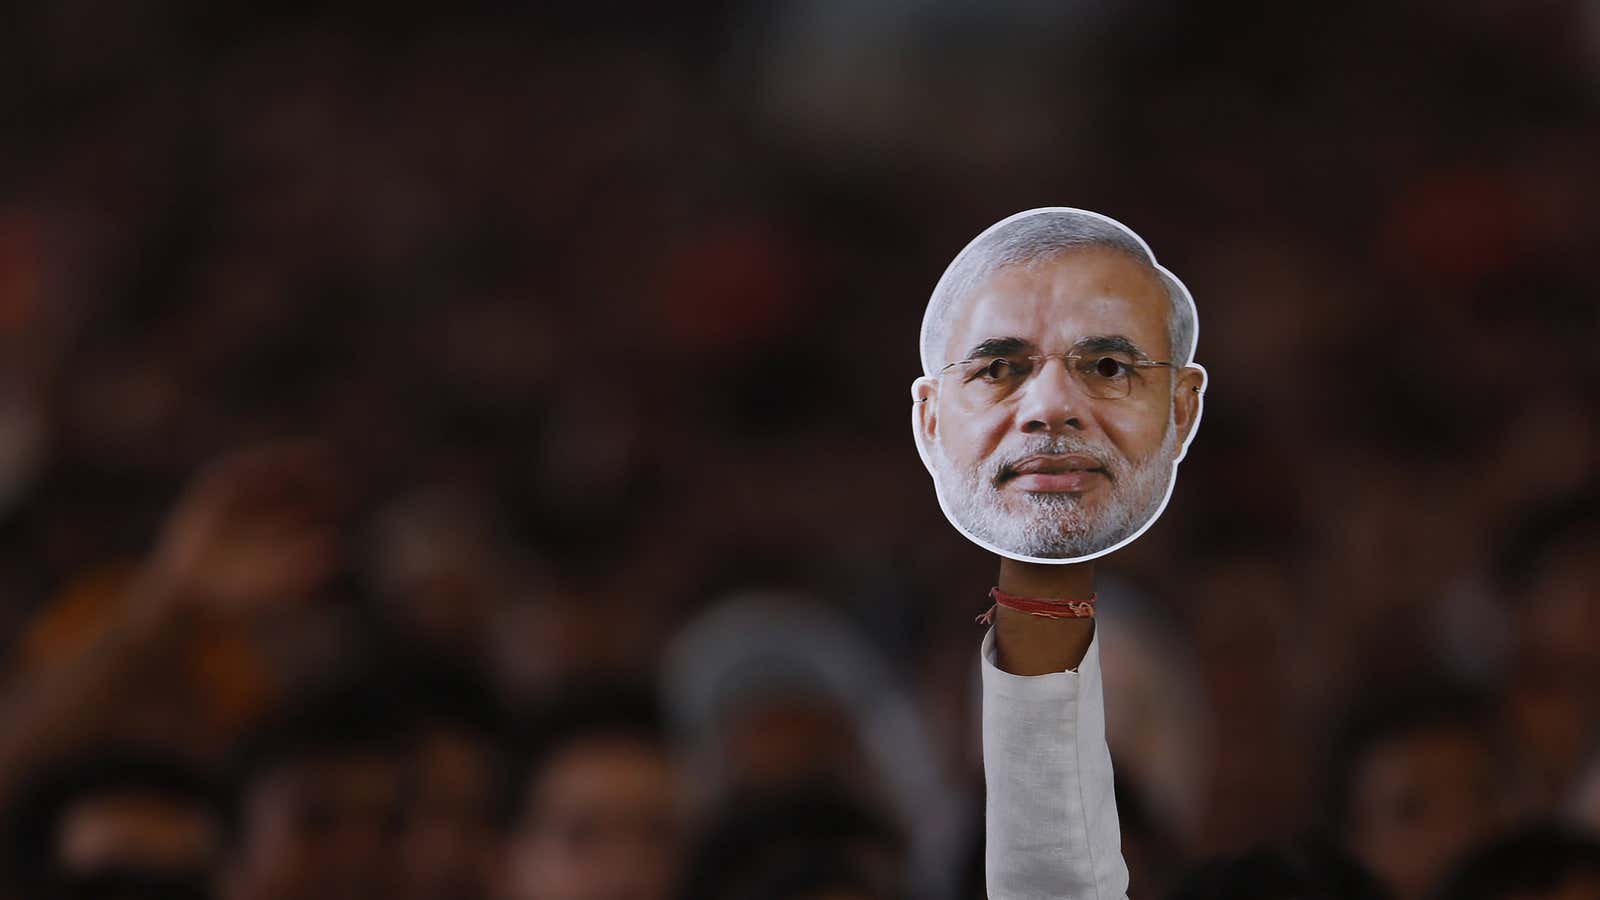 Overseas Indians think one man—Narendra Modi—could turn the country’s fortunes around. They’re wrong.